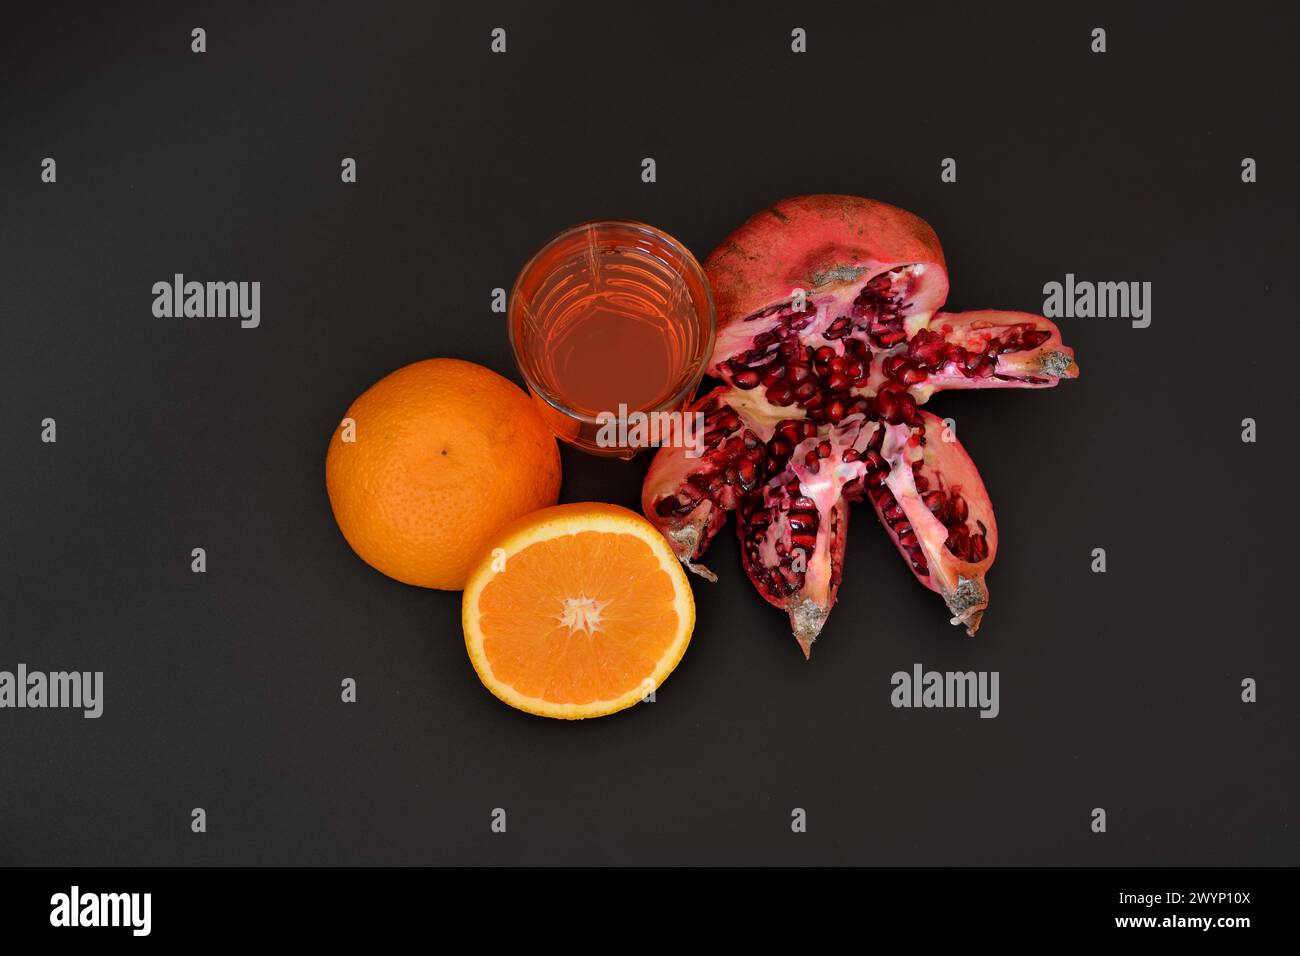 A glass of a mixture of tropical fruits on a black background, next to a half of a ripe orange and a broken pomegranate. Top view, flat lay. Stock Photo